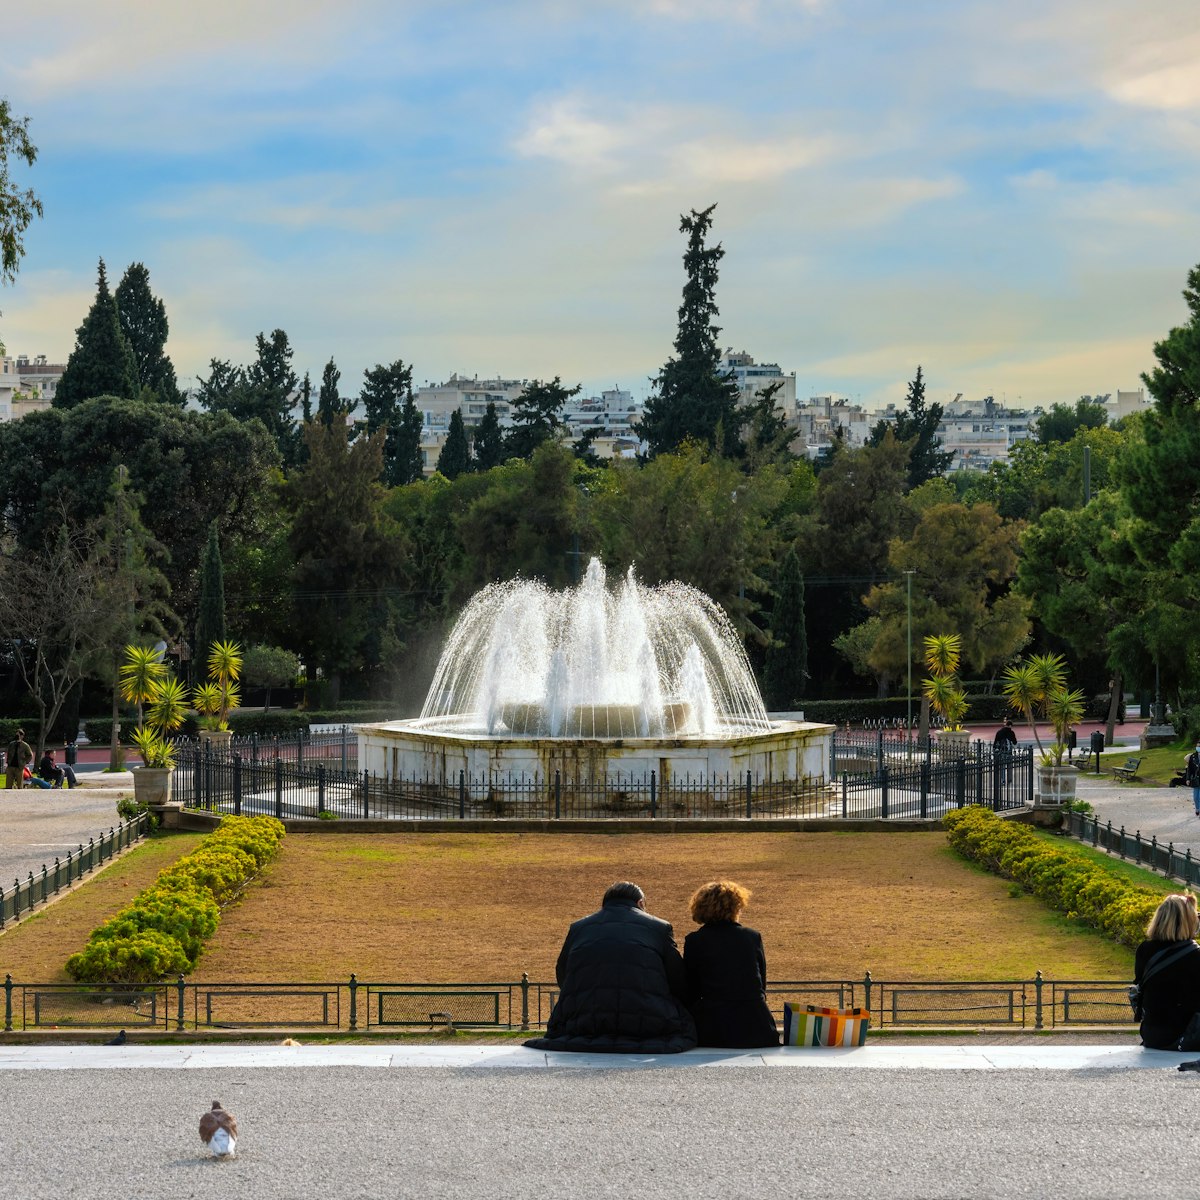 Athens, Attica, Greece - Jan 29, 2021: The marble fountain in front of the Zappeion Hall neoclassical building in the National Garden of Athens near Syntagma Square. People relaxing under the sun; Shutterstock ID 1965705790; your: Erin Lenczycki; gl: 65050; netsuite: Digital; full: POI
1965705790